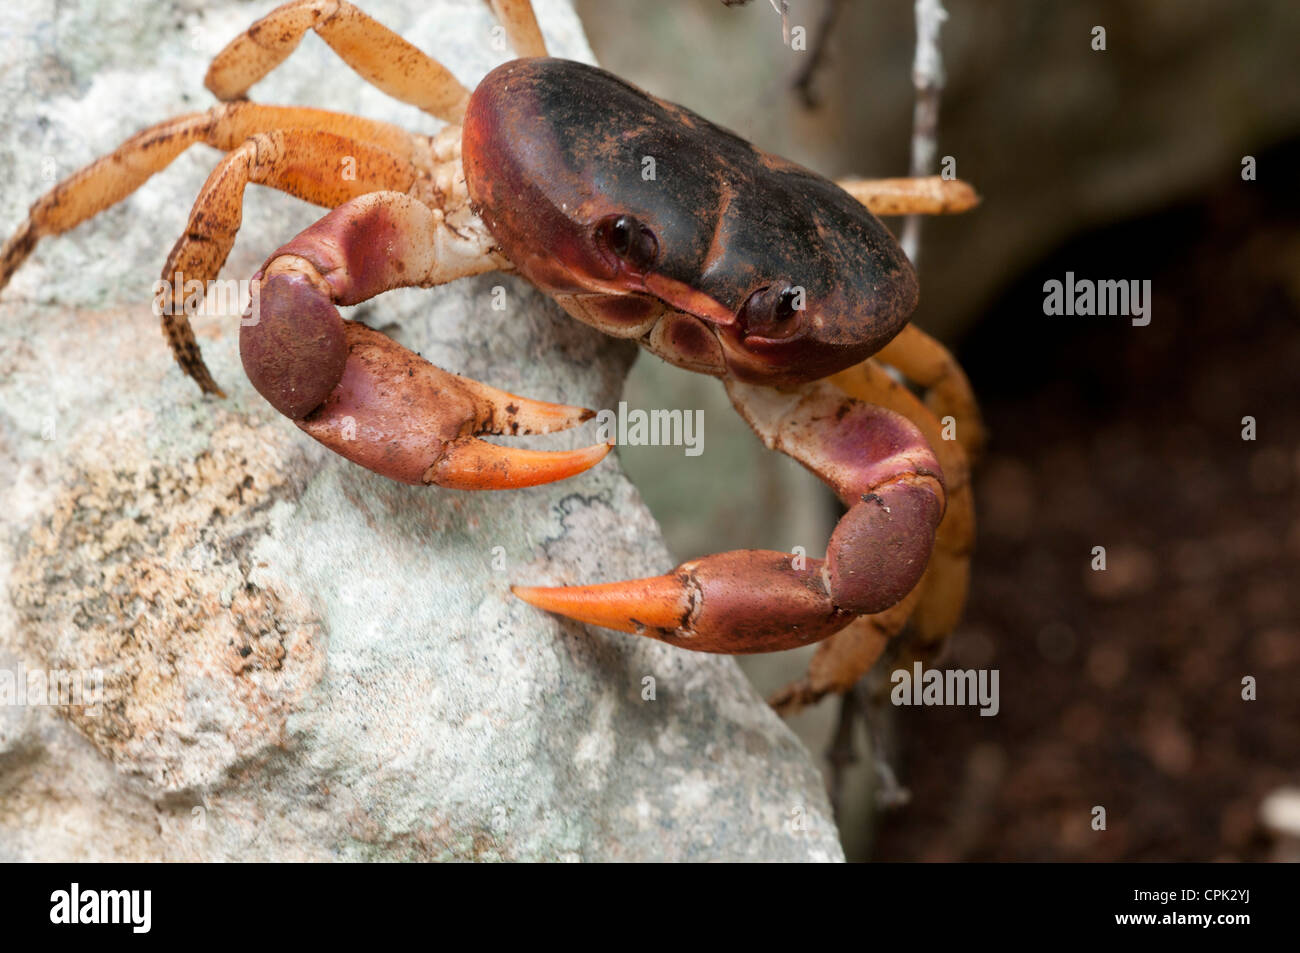 Stock photo of a black land crab defensive posture. Stock Photo